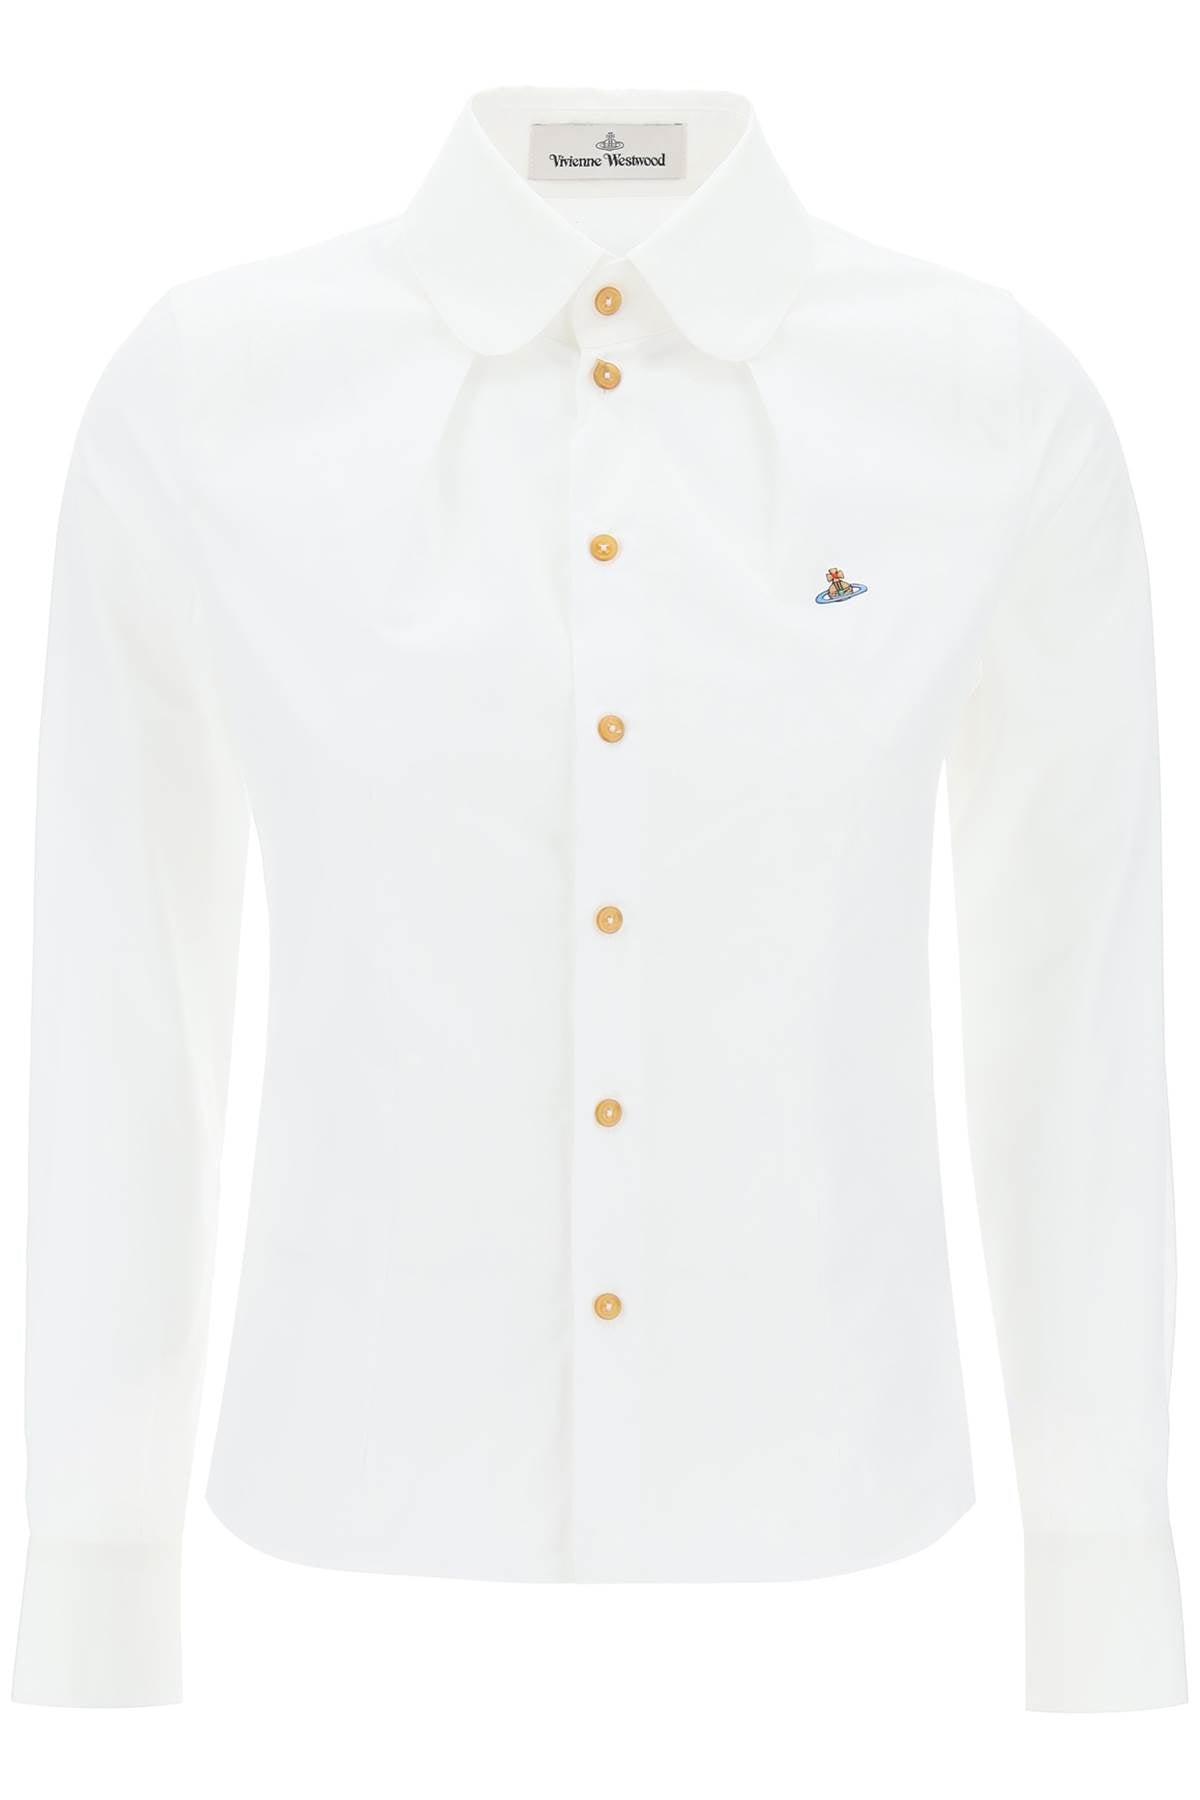 Vivienne Westwood Toulouse Shirt With Darts   White